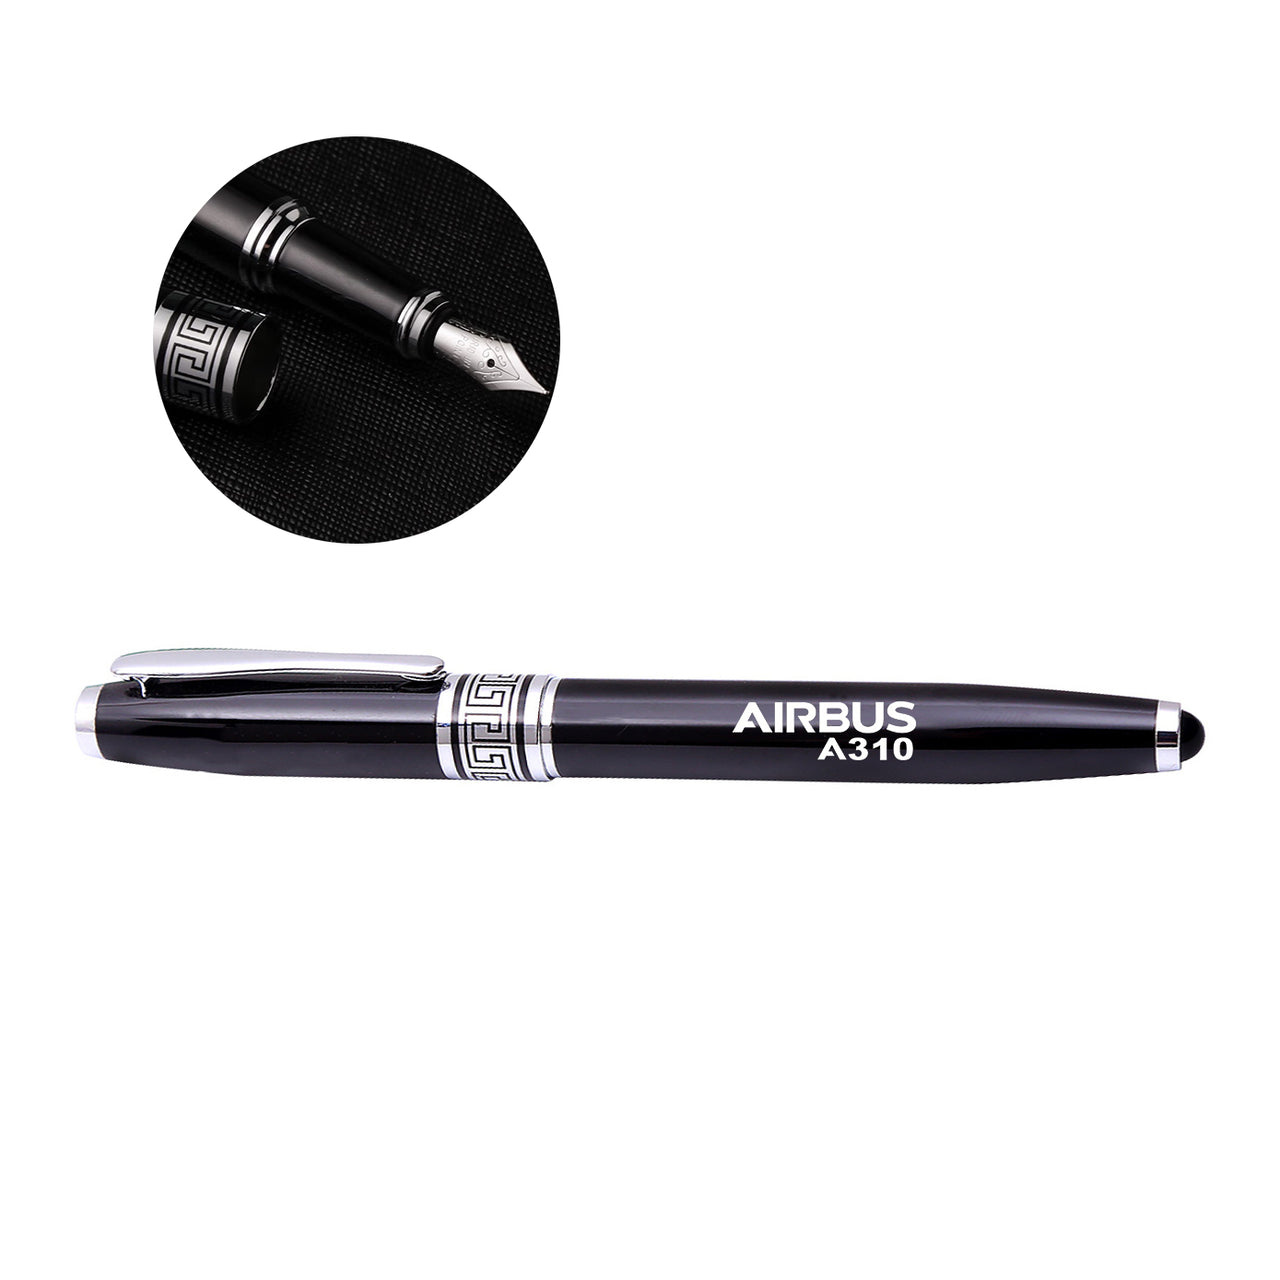 Airbus A310 & Text Designed Pens